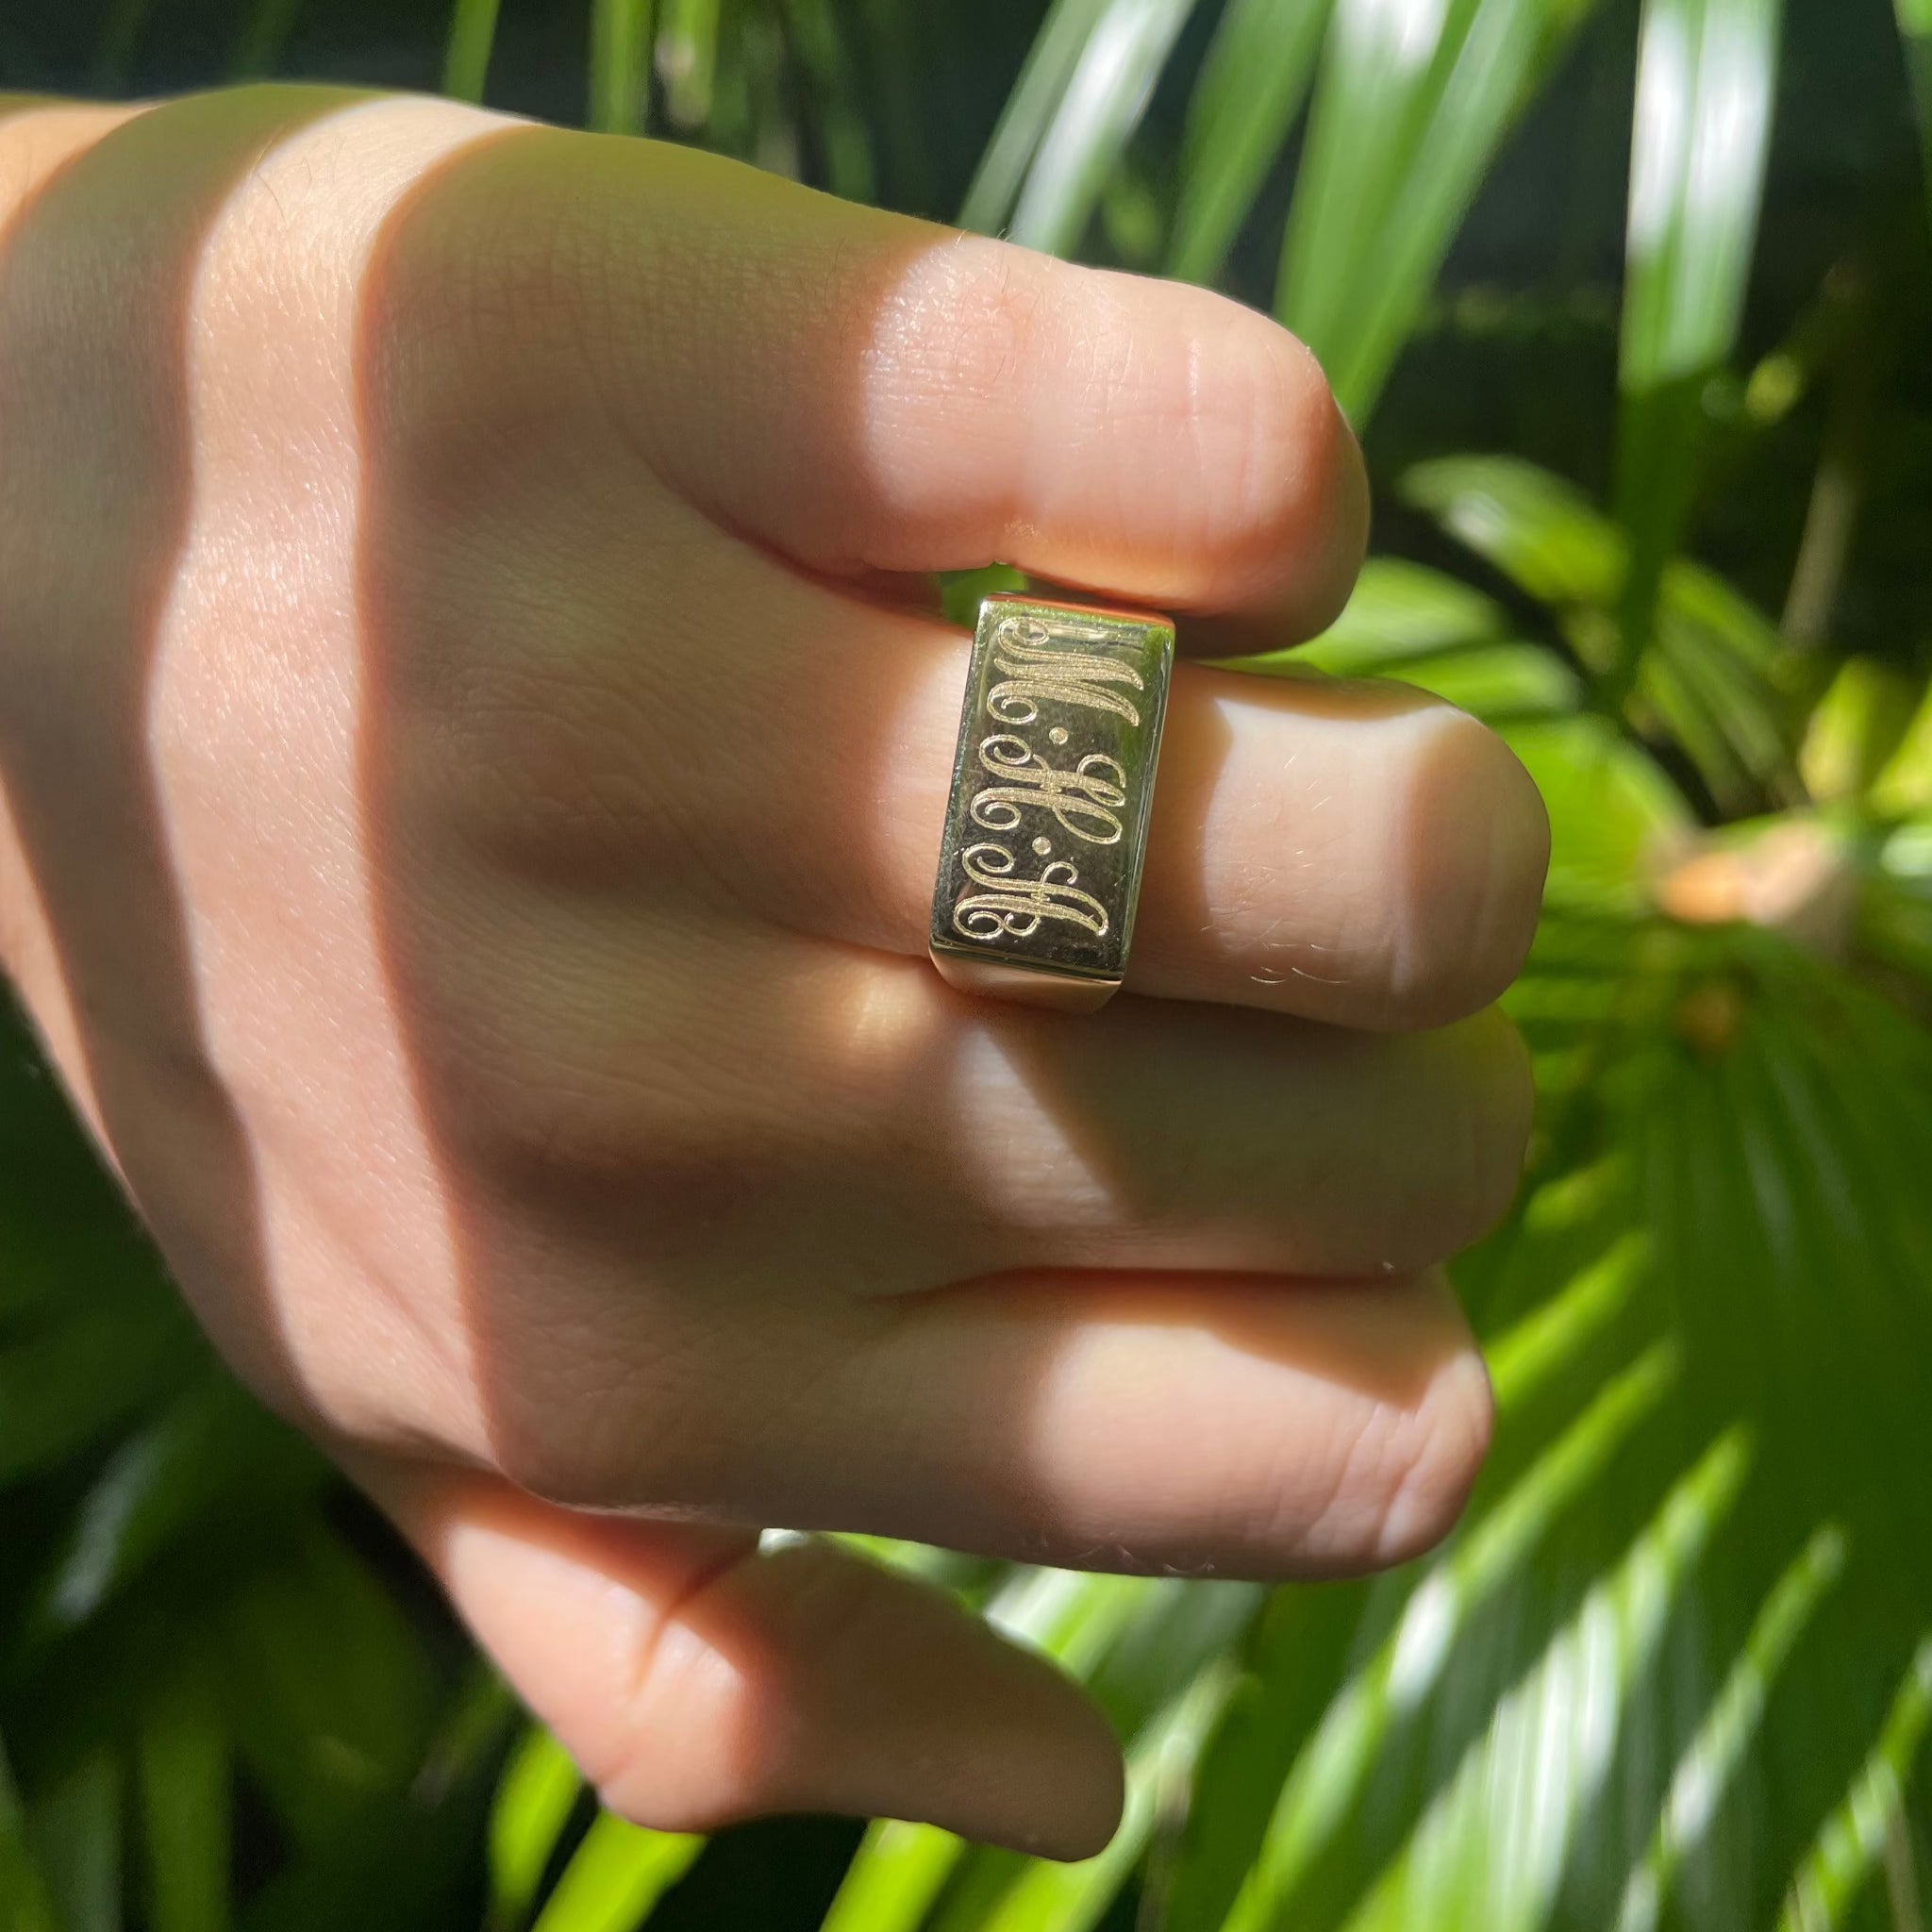 Personalized 14K Gold Bar Signet Ring